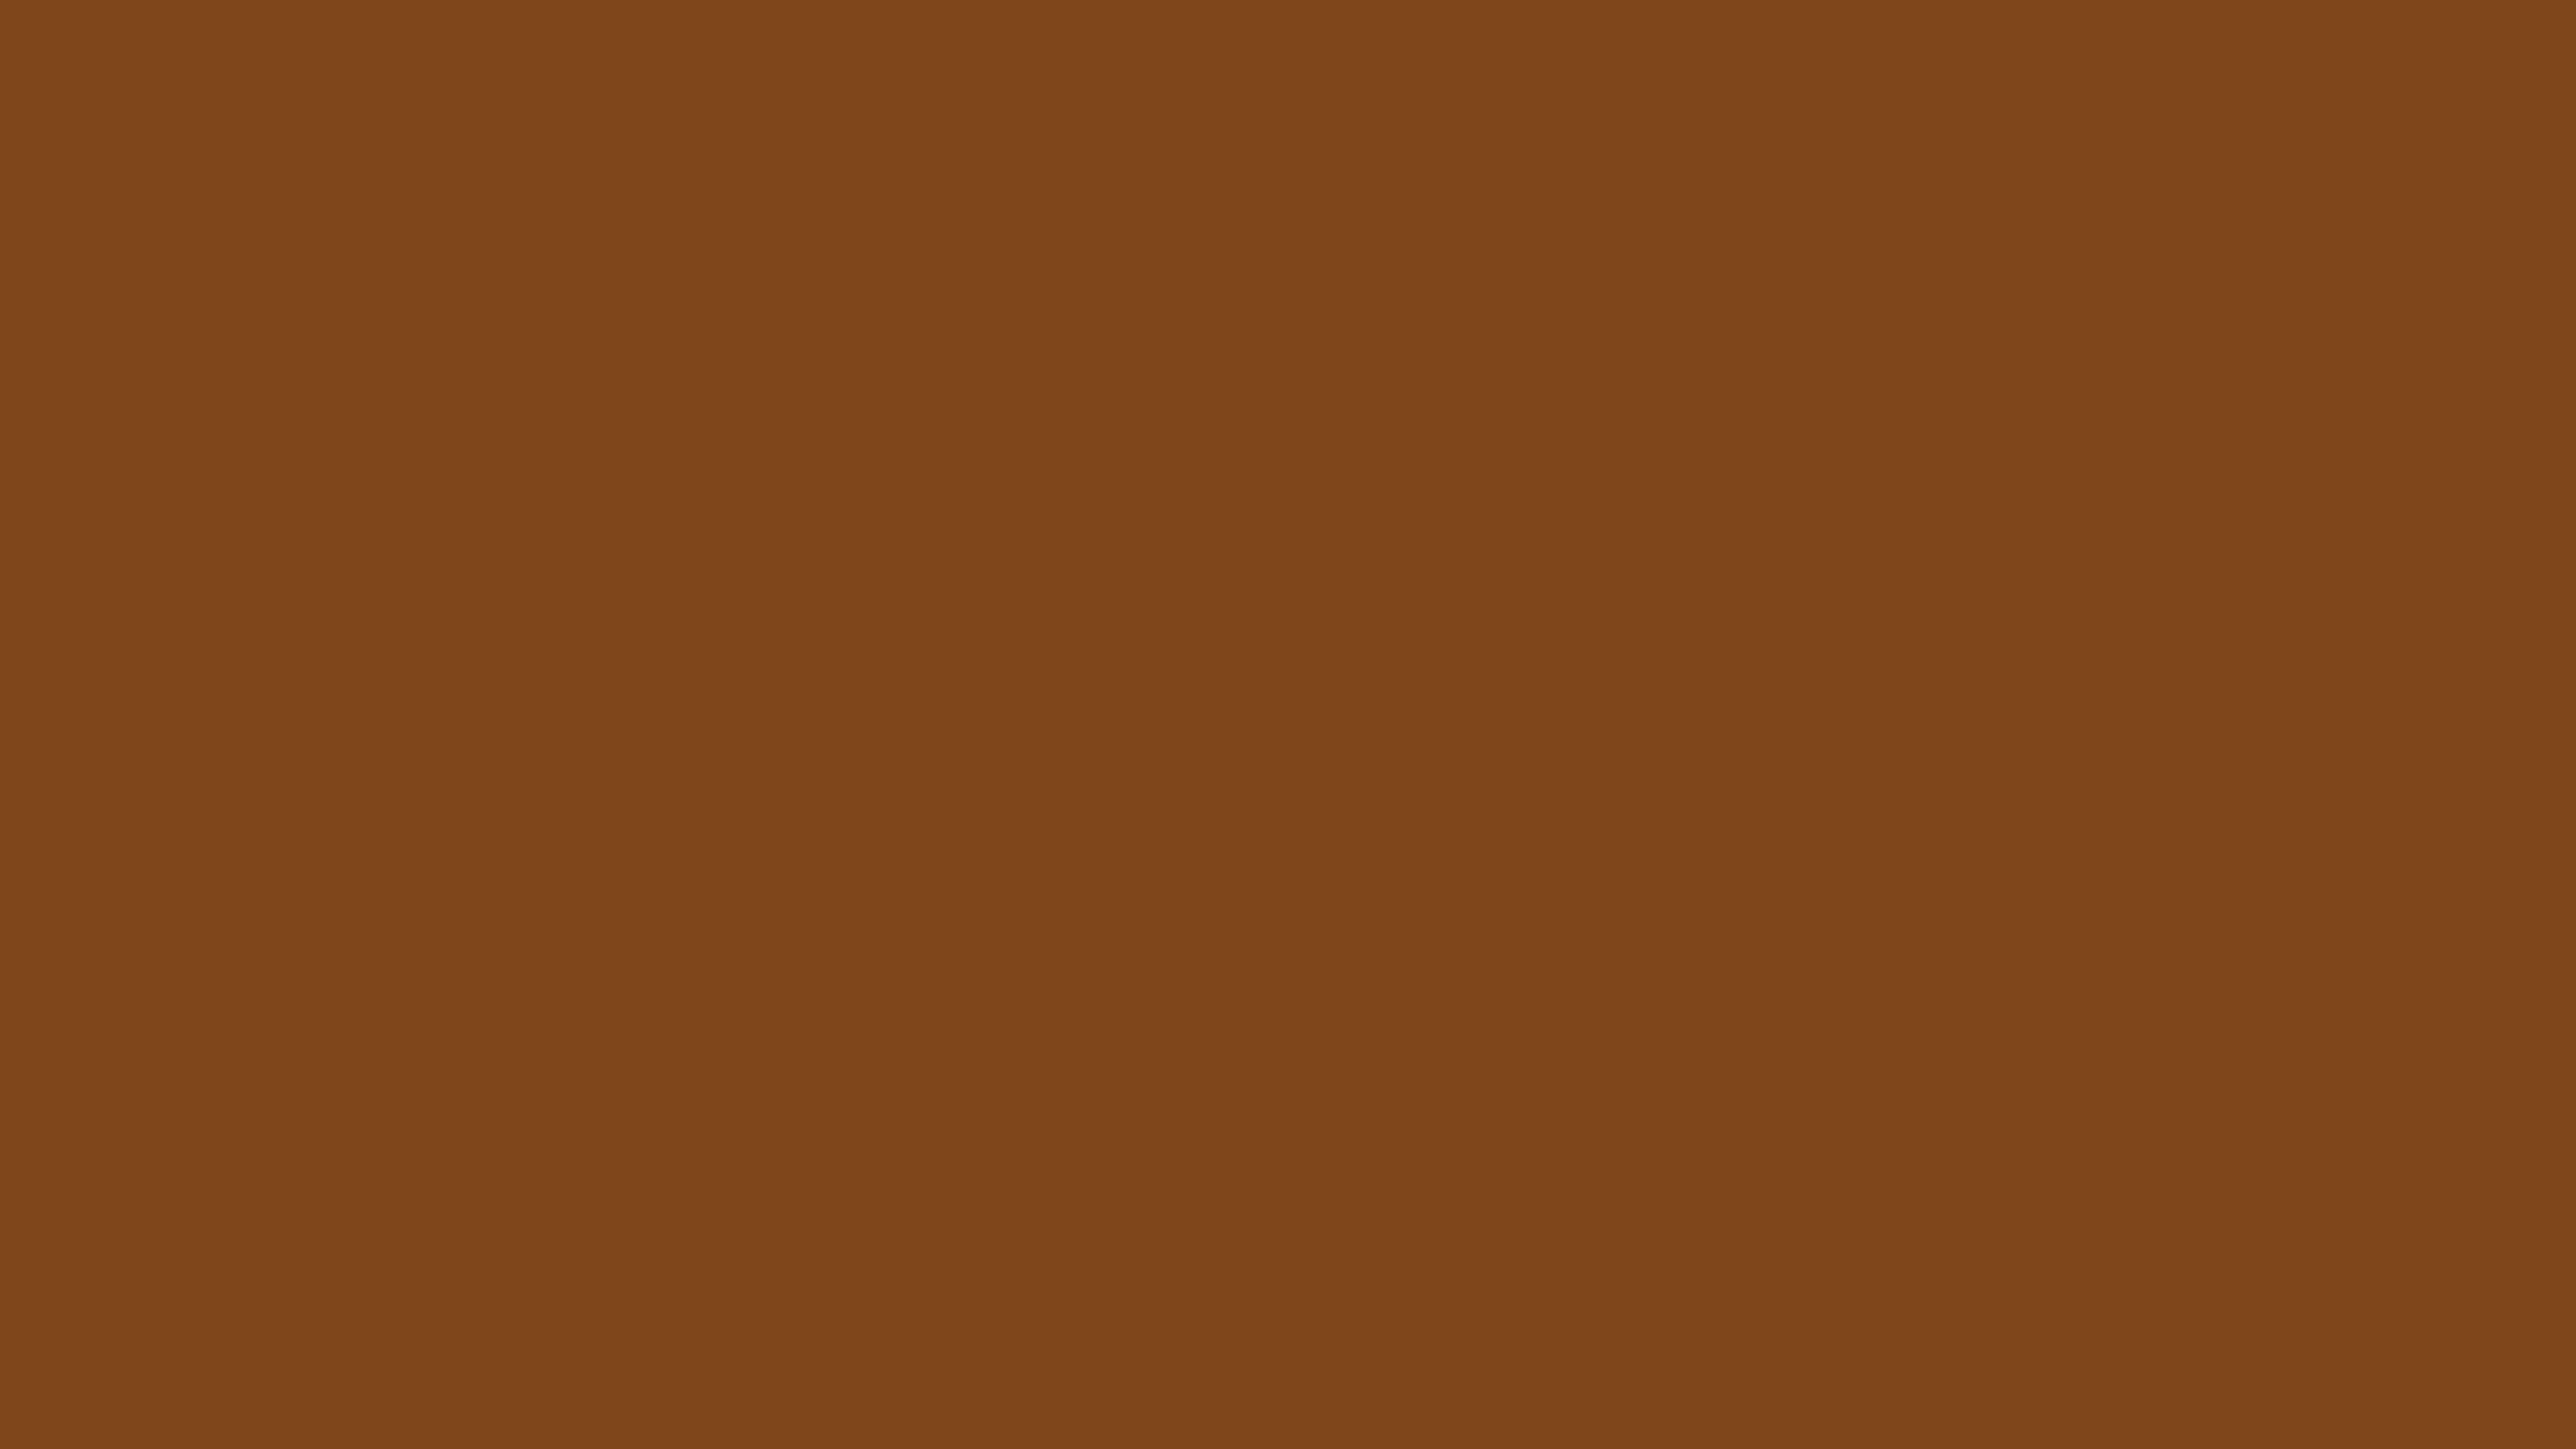 7680x4320 Russet Solid Color Background